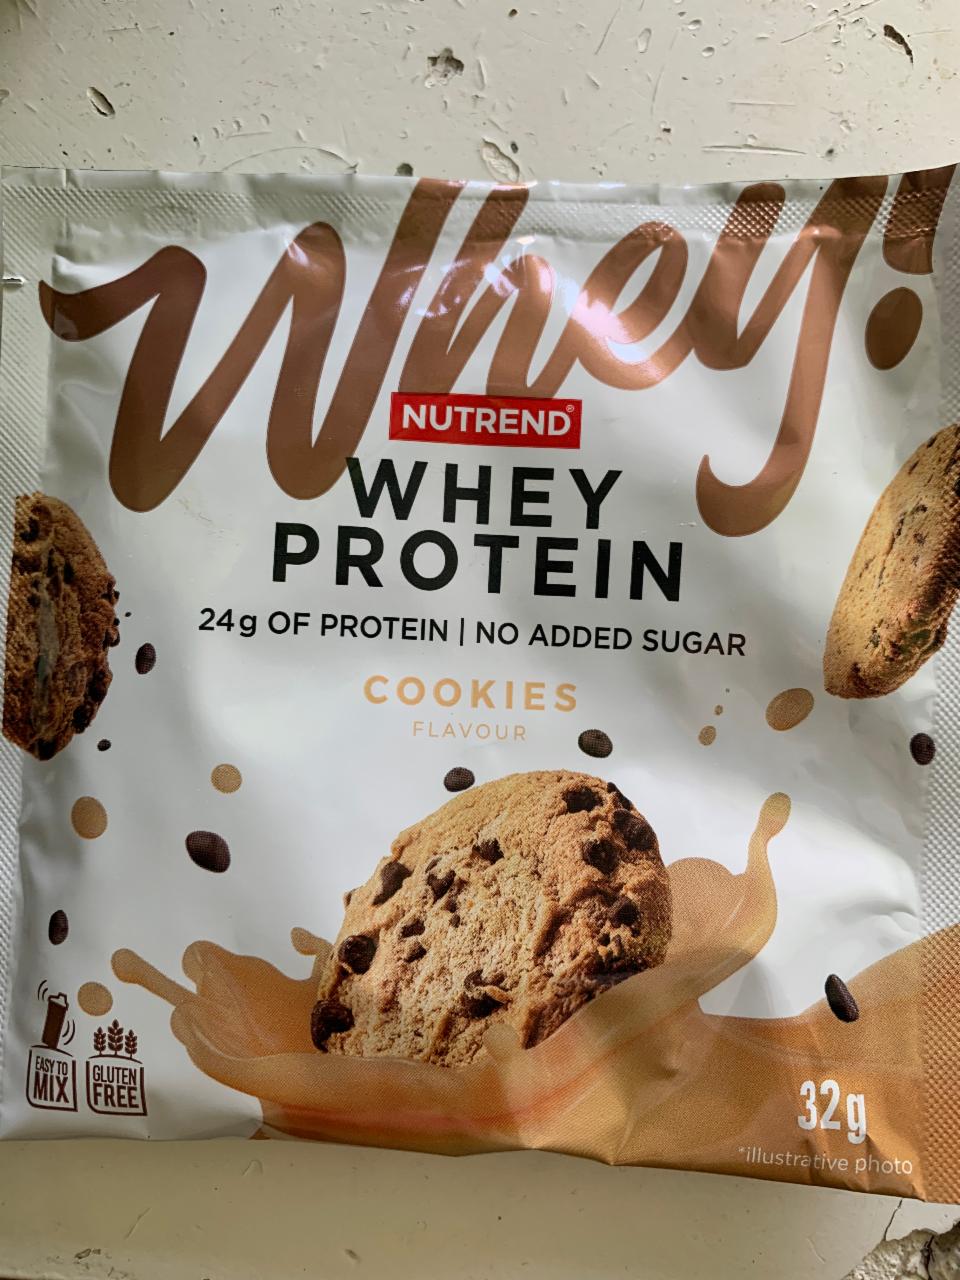 Fotografie - Whey Protein Cookies flavour Nutrend